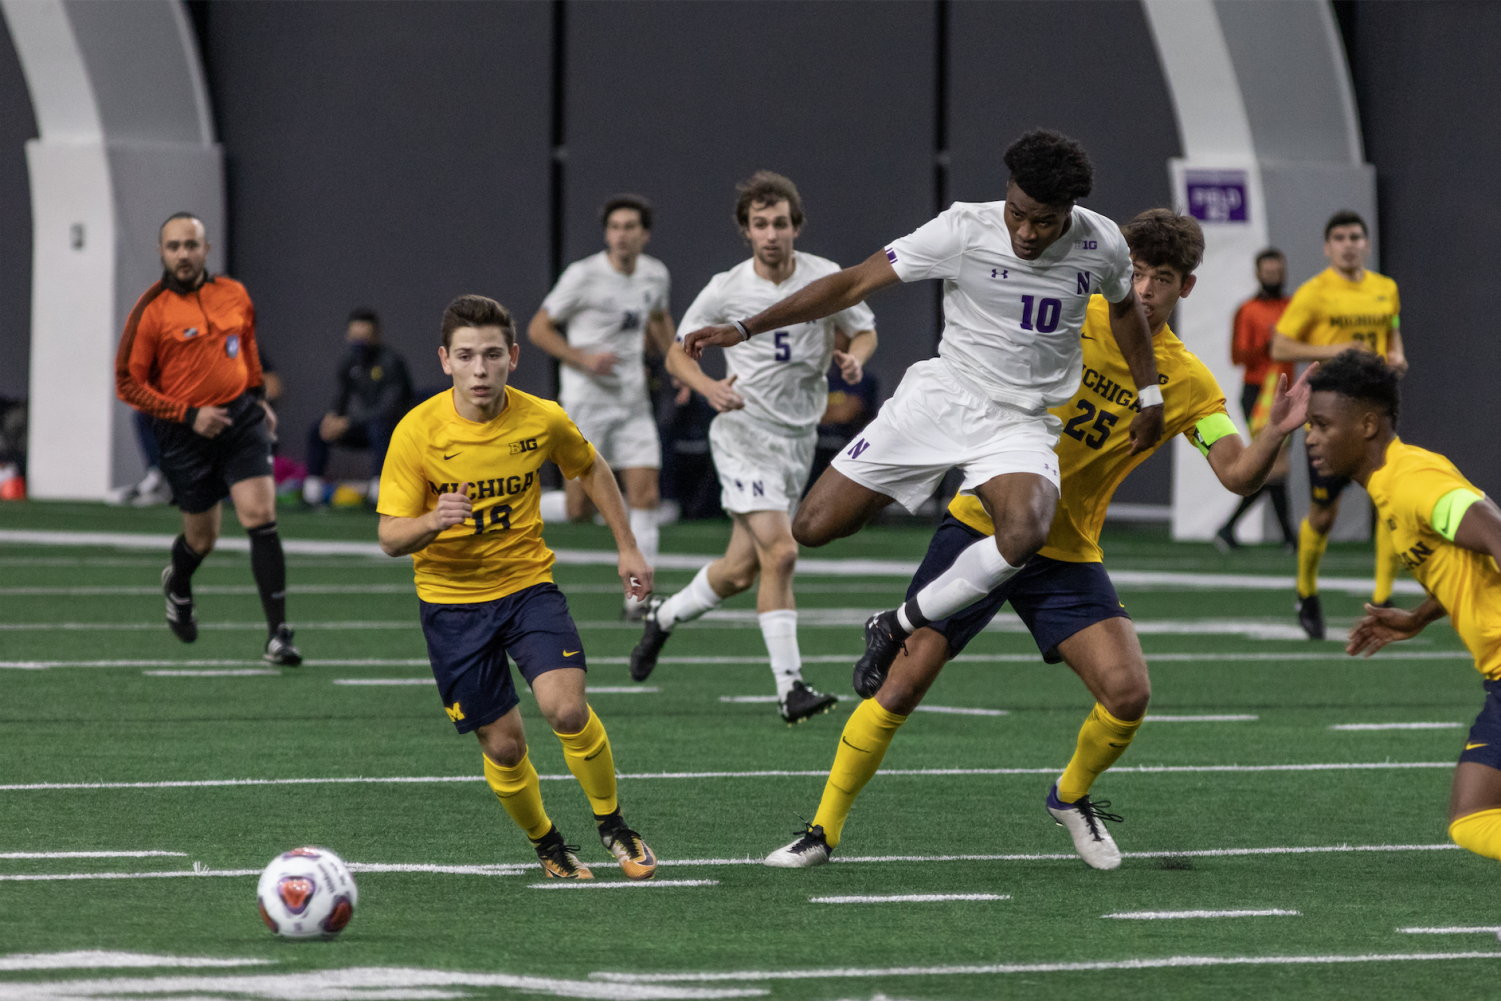 Ugo+Achara+Jr.+catches+up+to+the+ball+Friday+against+Michigan.+On+Tuesday+against+Wisconsin%2C+the+sophomore+forward+came+through+with+his+first+two+goals+of+the+season%2C+including+a+wonderstrike+from+inside+the+18-yard+box+that+put+Northwestern+up+3-0.